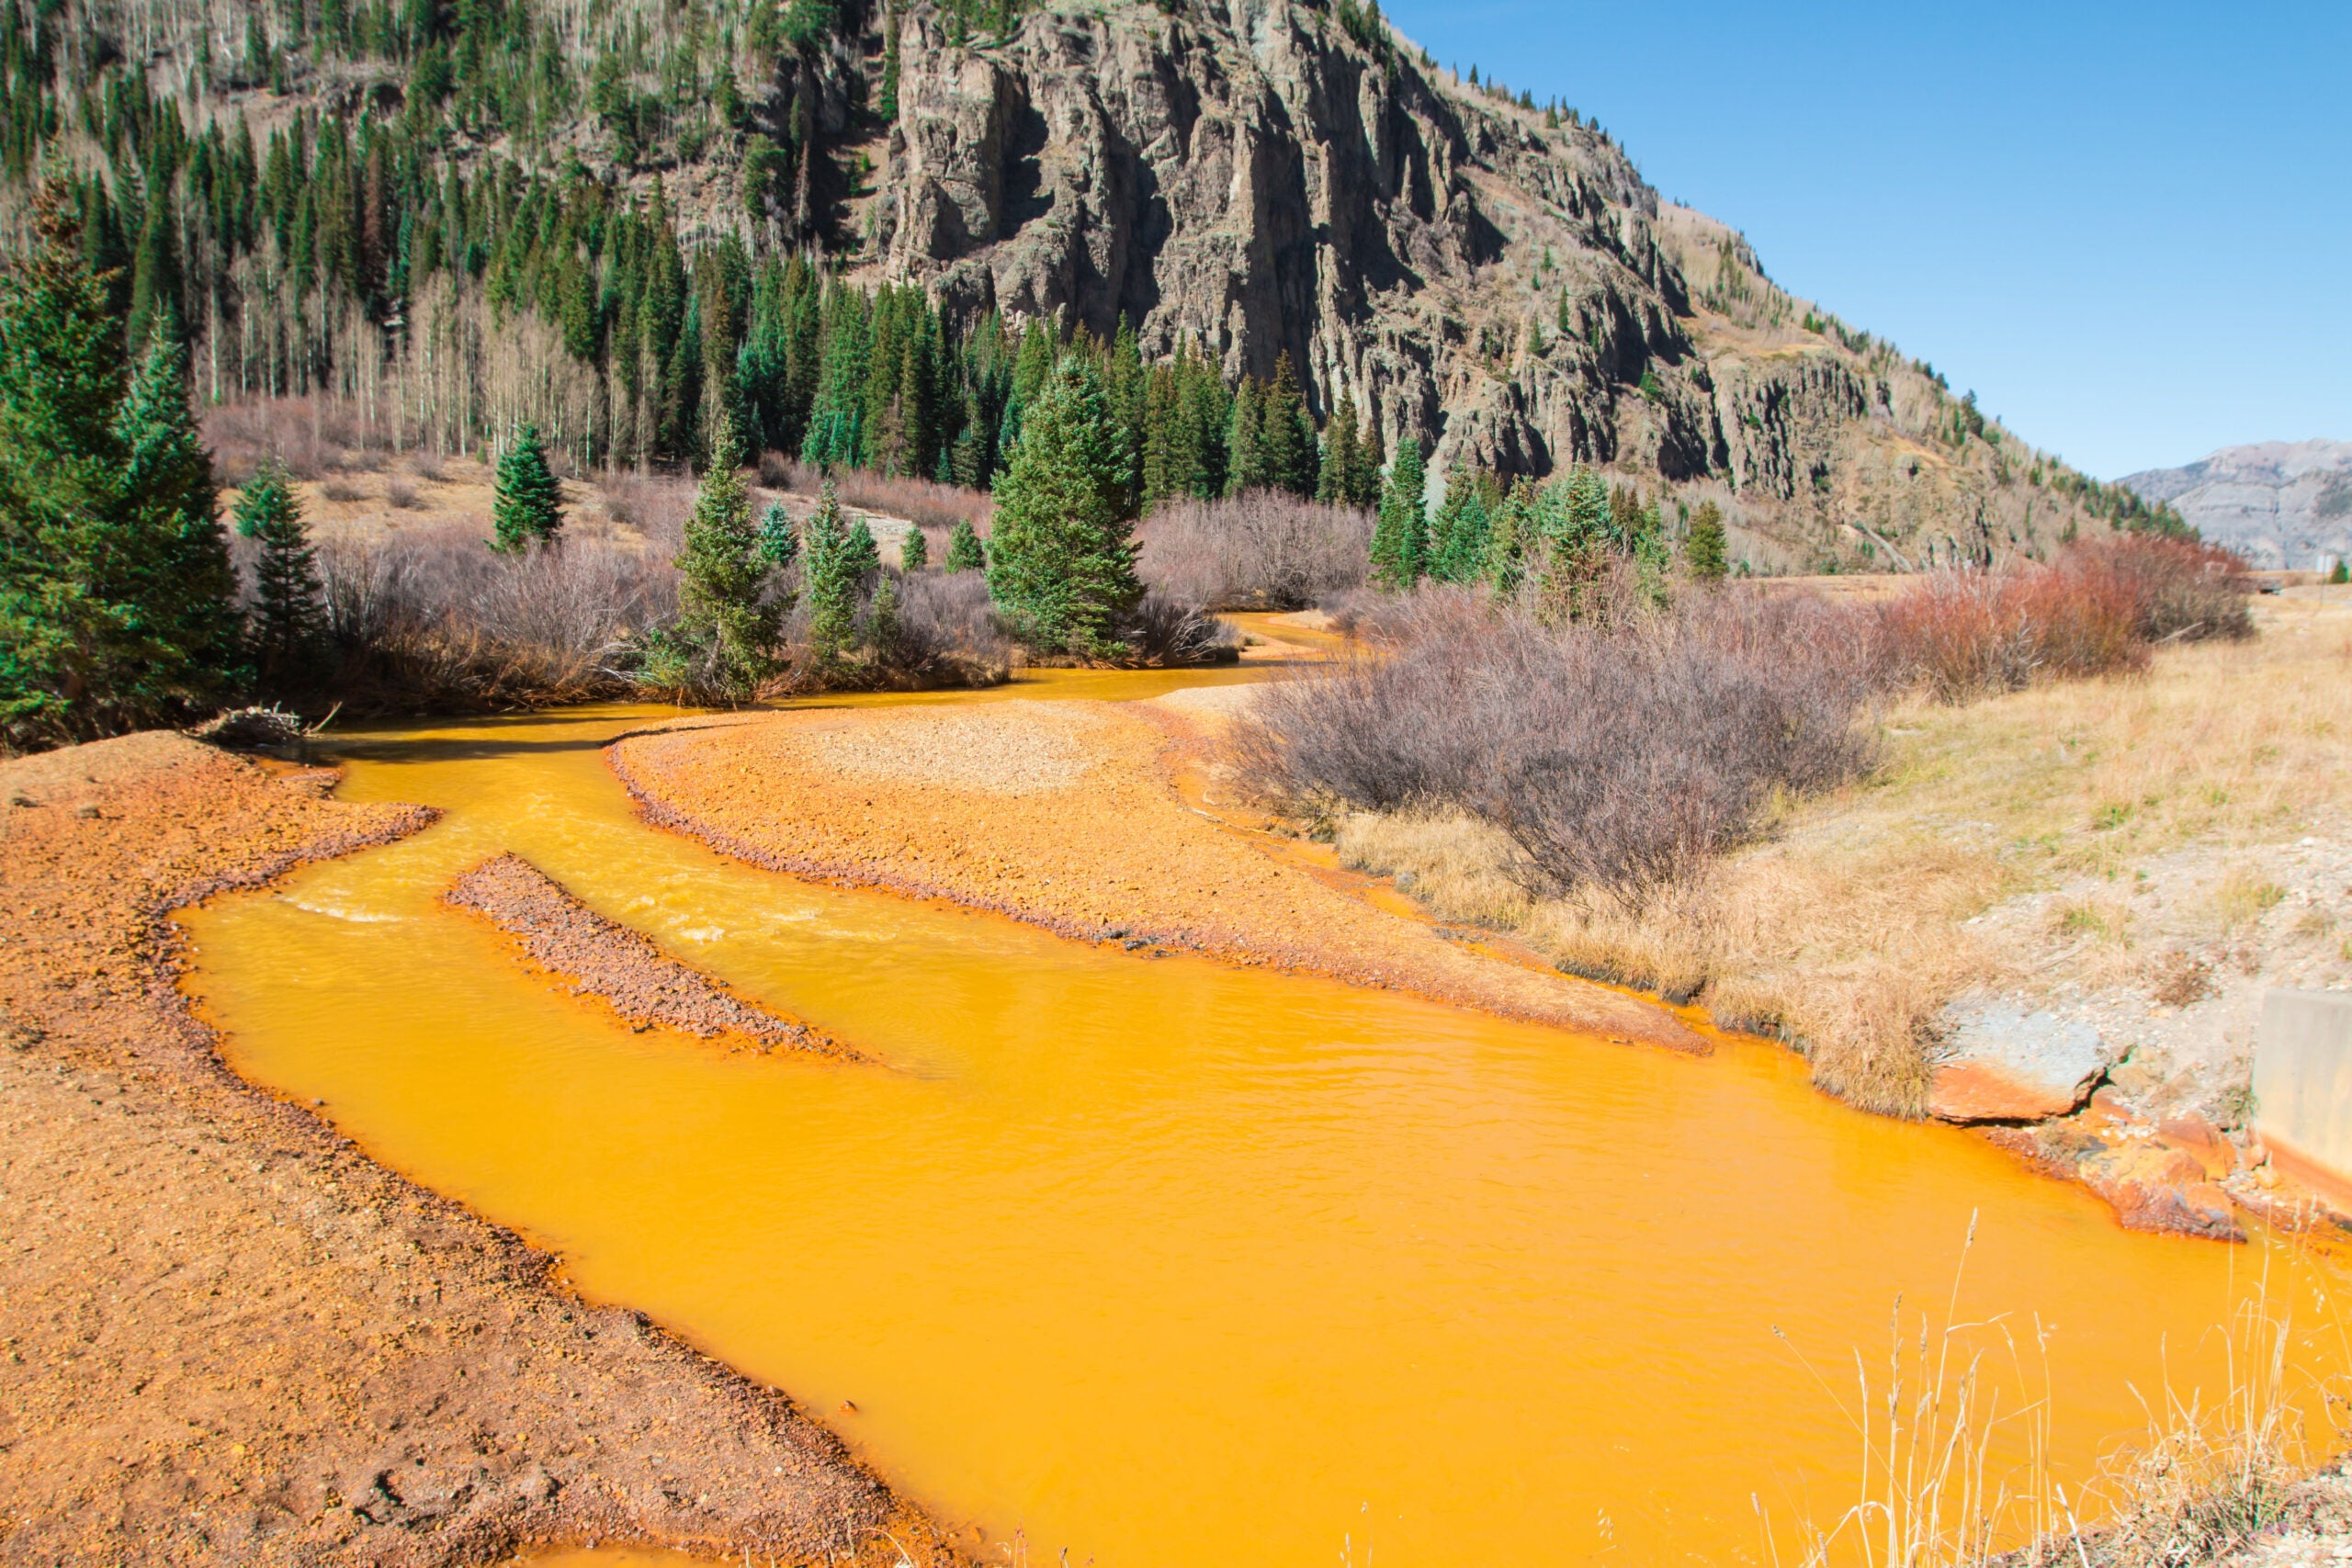 Toxic waste stains water yellow-orange near abandoned mines in Colorado.